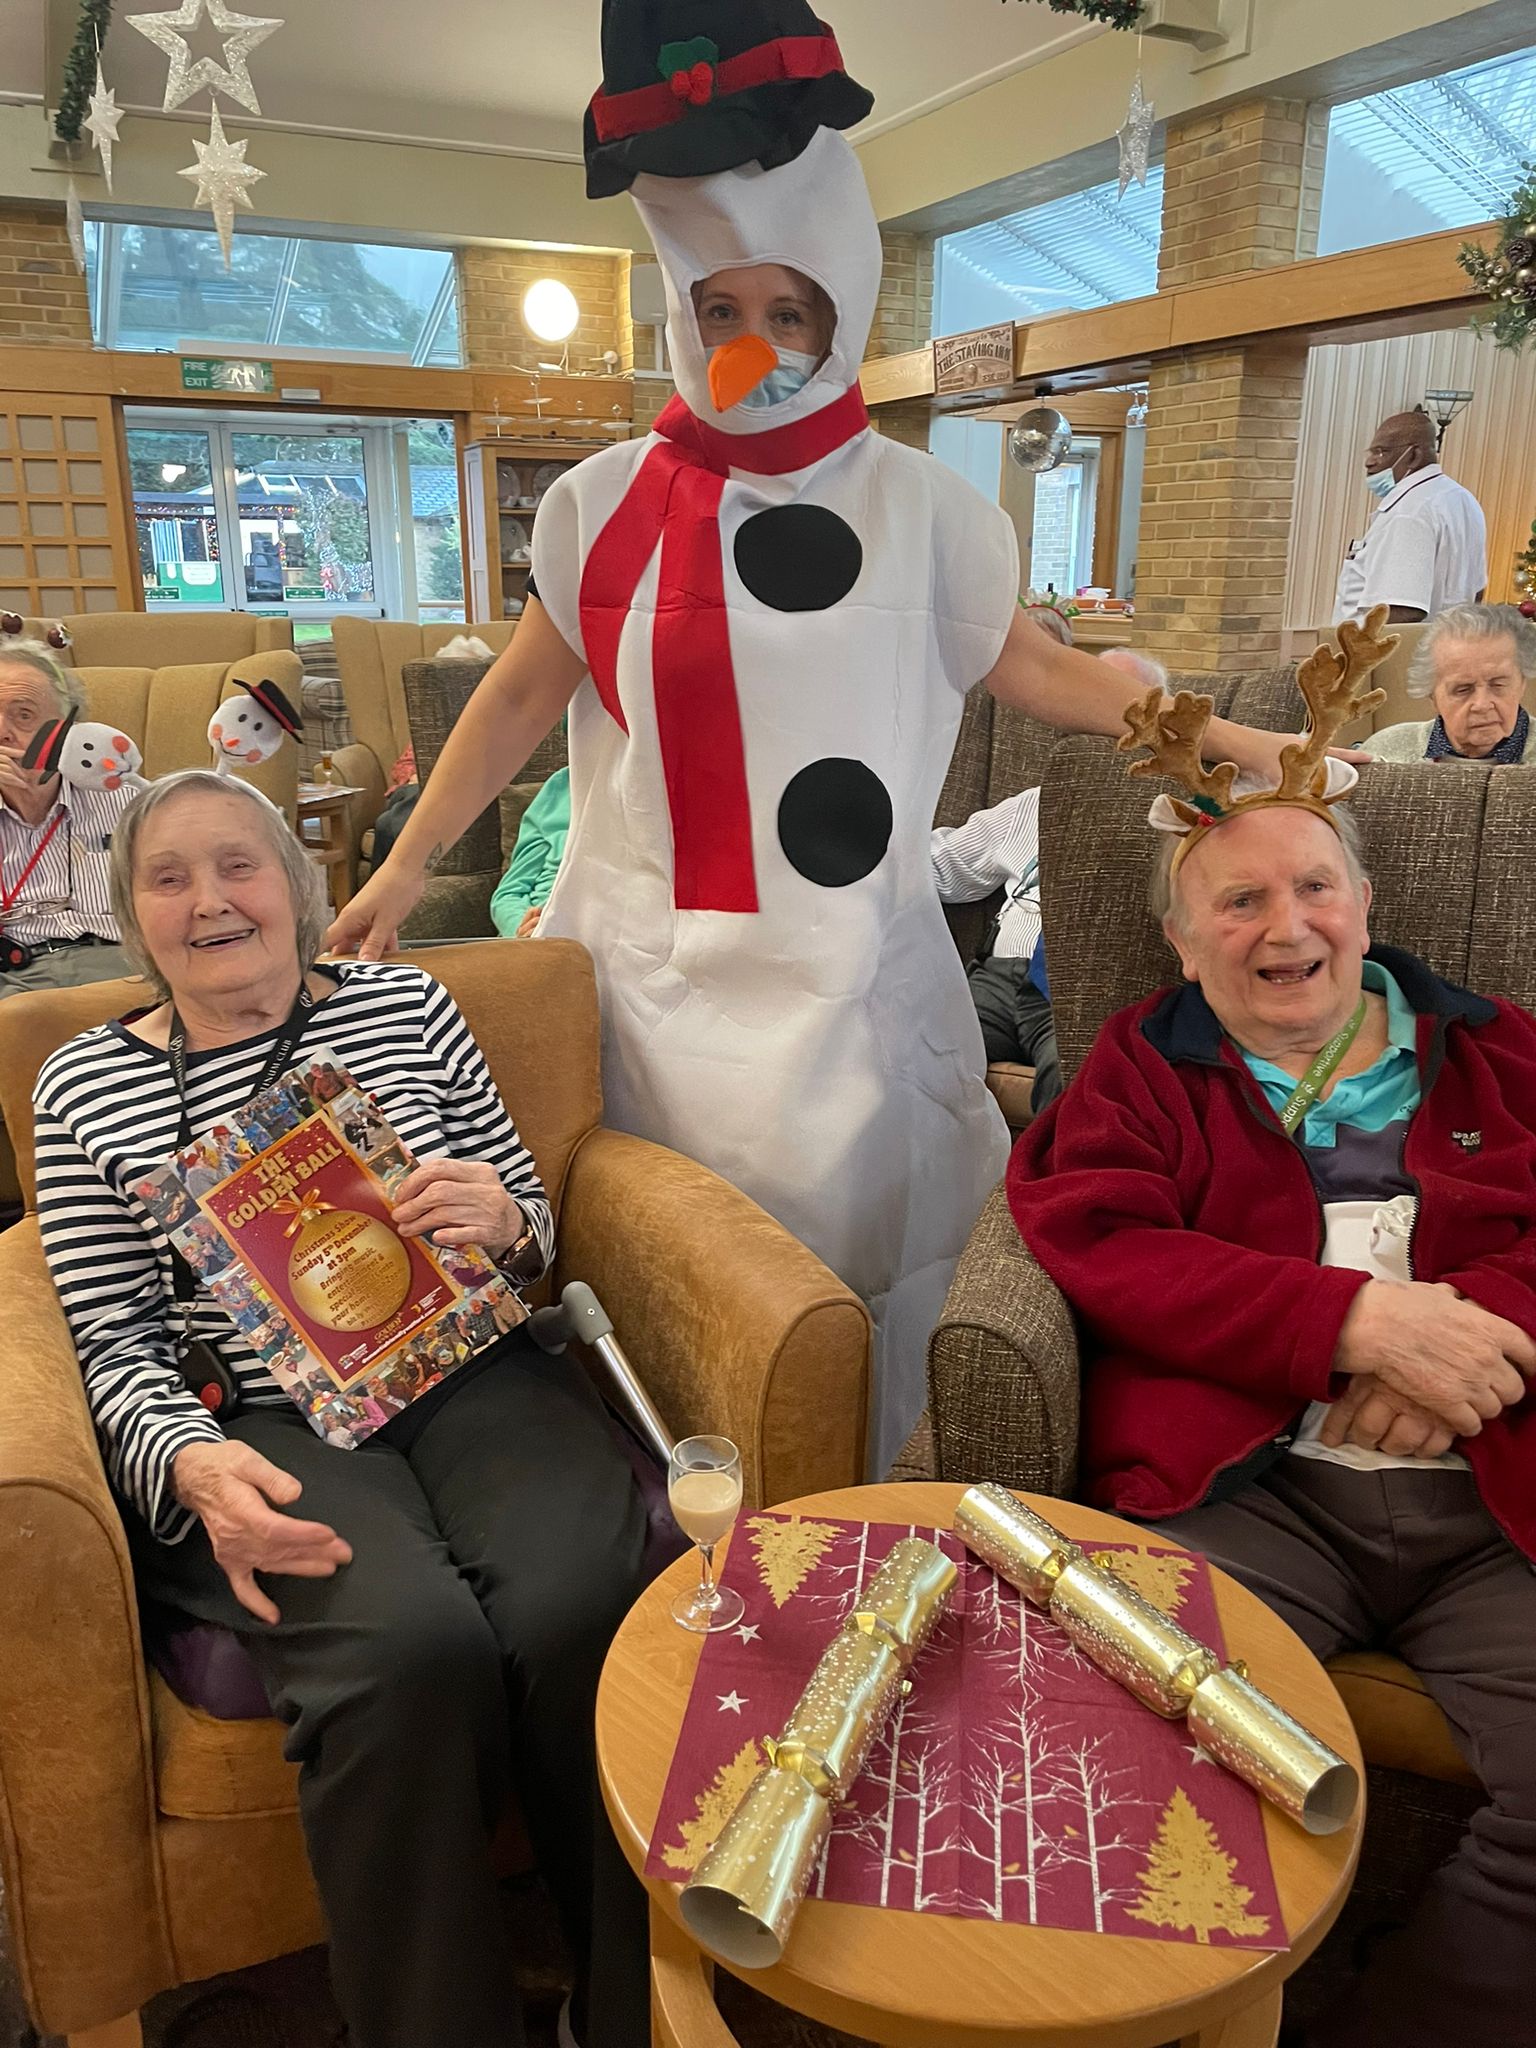 Photo from Care Home showing residents enjoying the ‘Golden Ball Christmas Show’